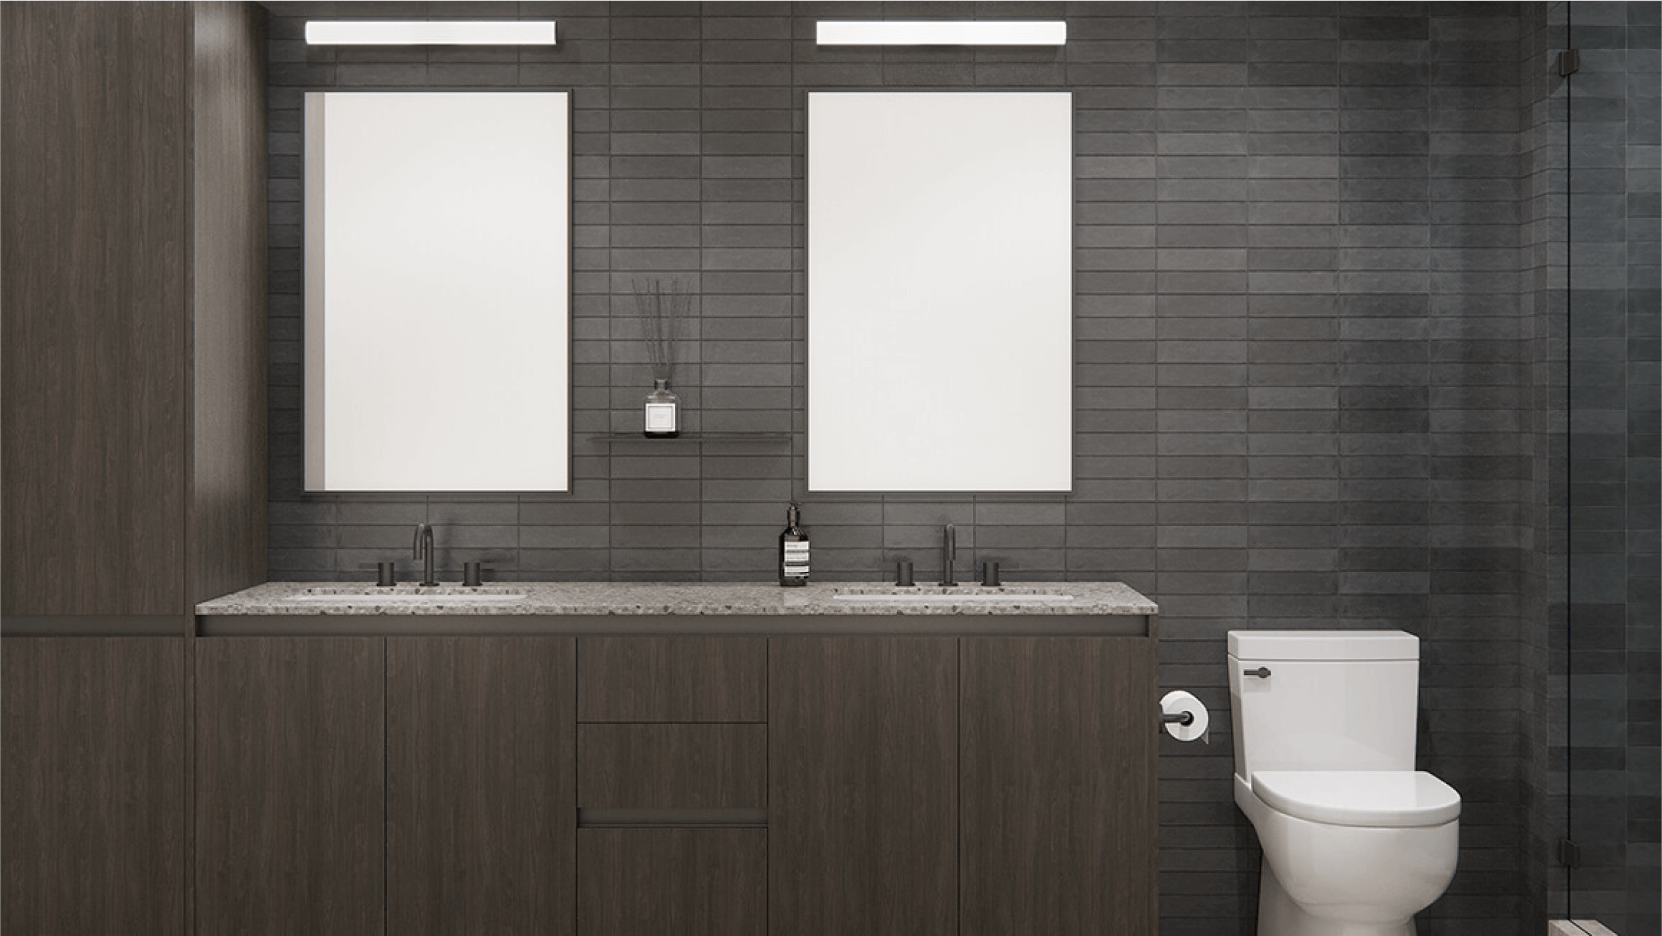 Sleek and stylish bathroom interior at Vesper ATX with charcoal gray tiles, featuring twin rectangular mirrors with LED lighting above a dual sink vanity, complemented by dark wood cabinetry and modern matte black faucets.